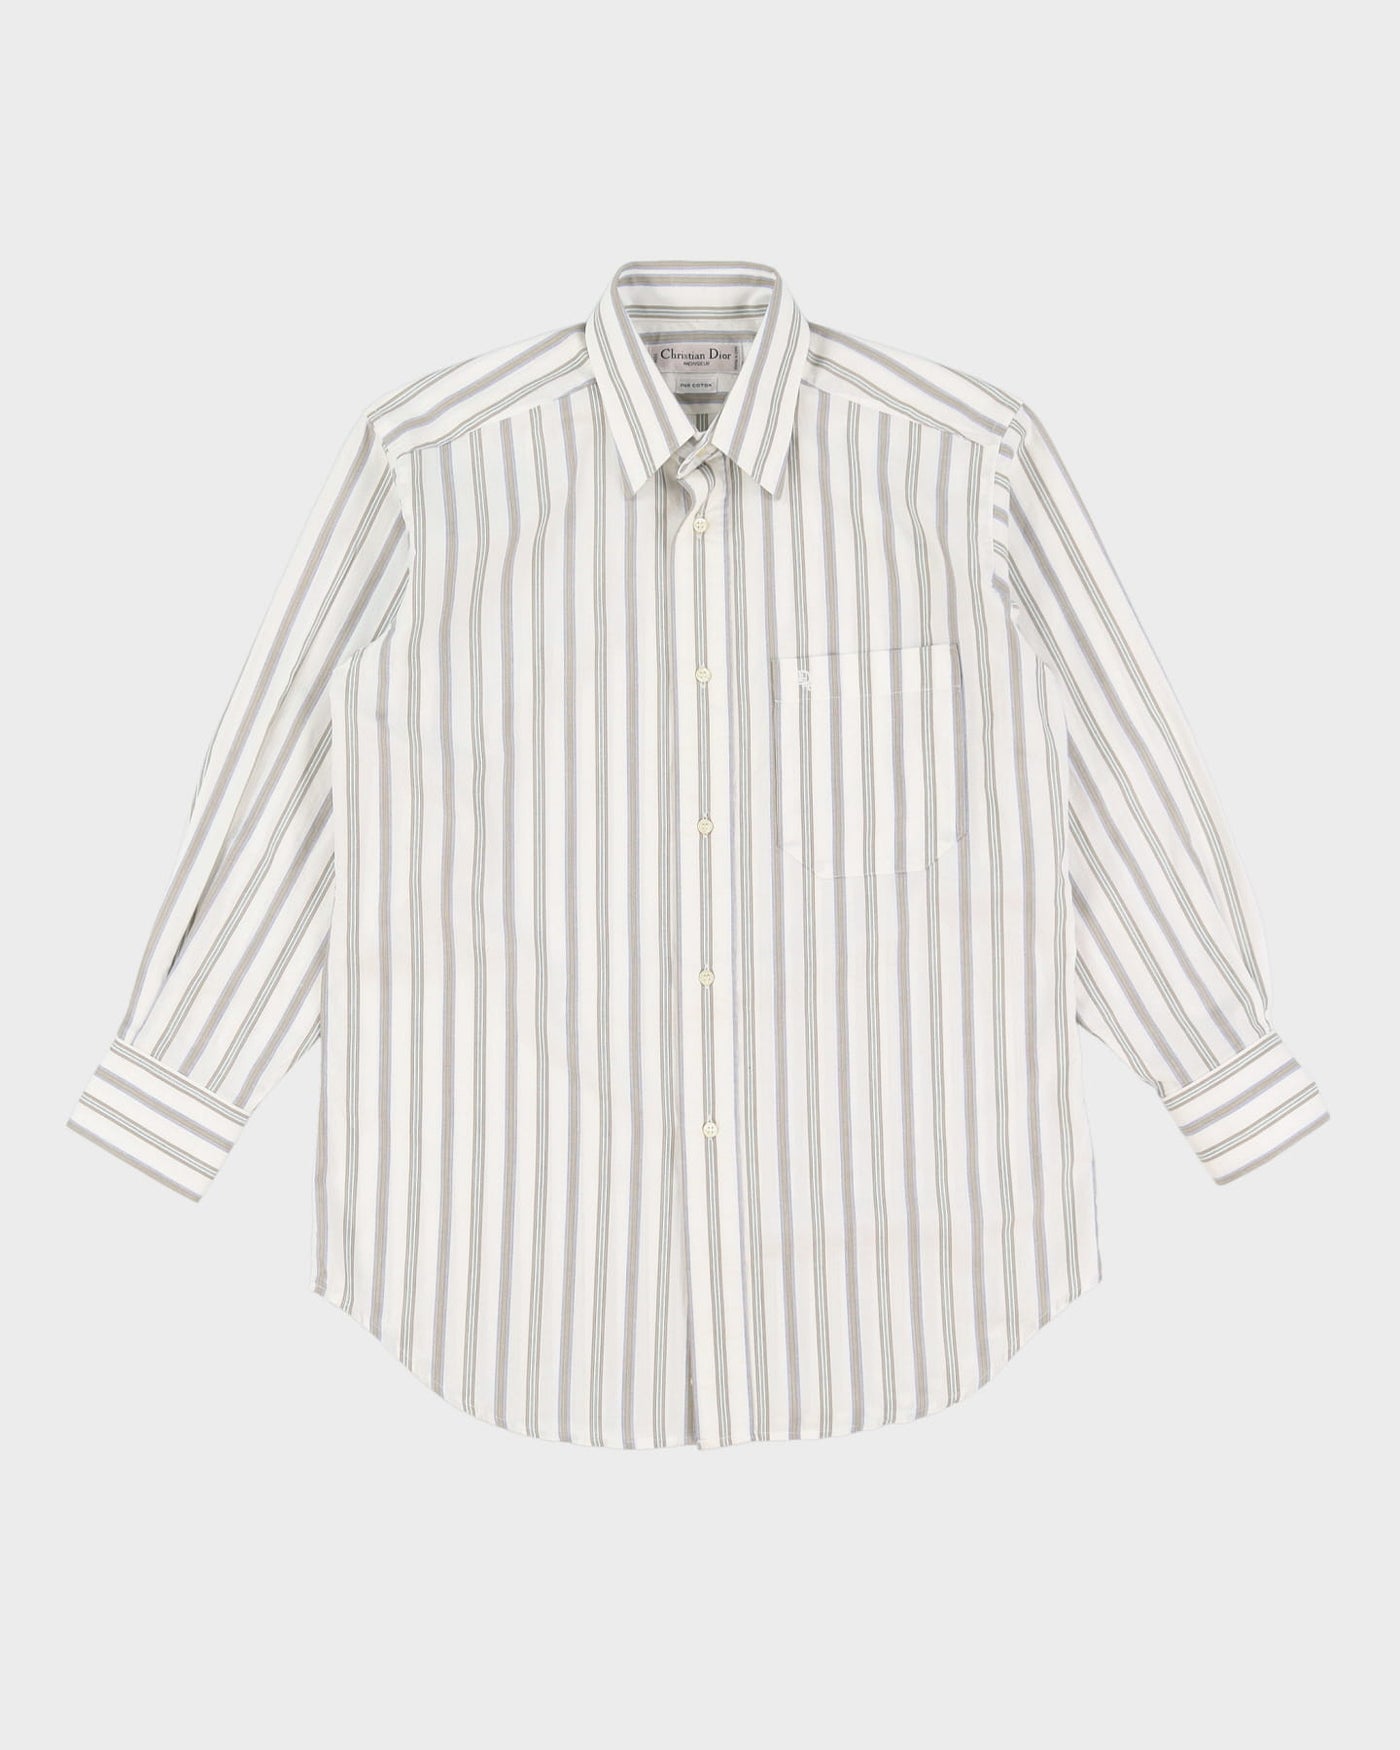 00s Christian Dior Grey / White Striped Long Sleeve Button Up Shirt - S / M